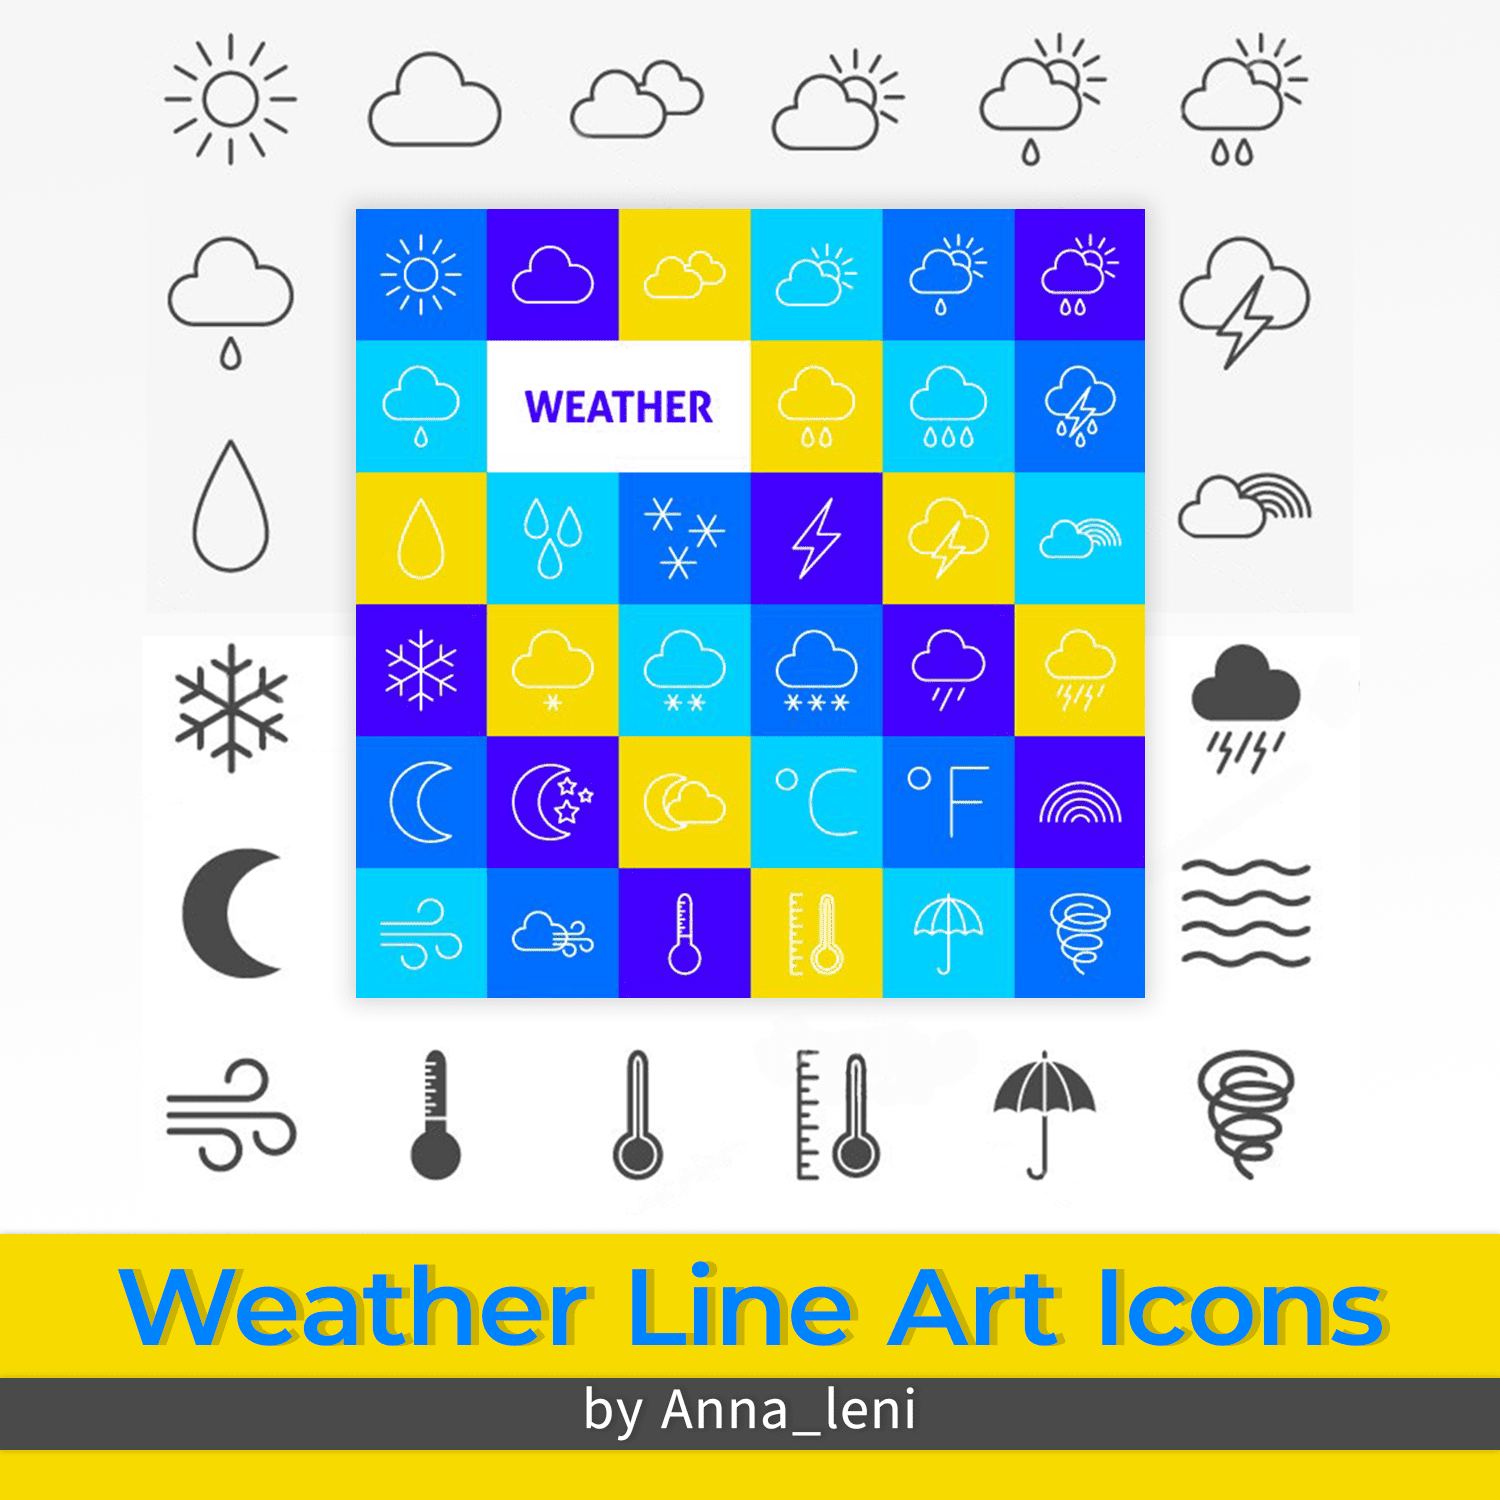 Weather Line Art Icons cover.